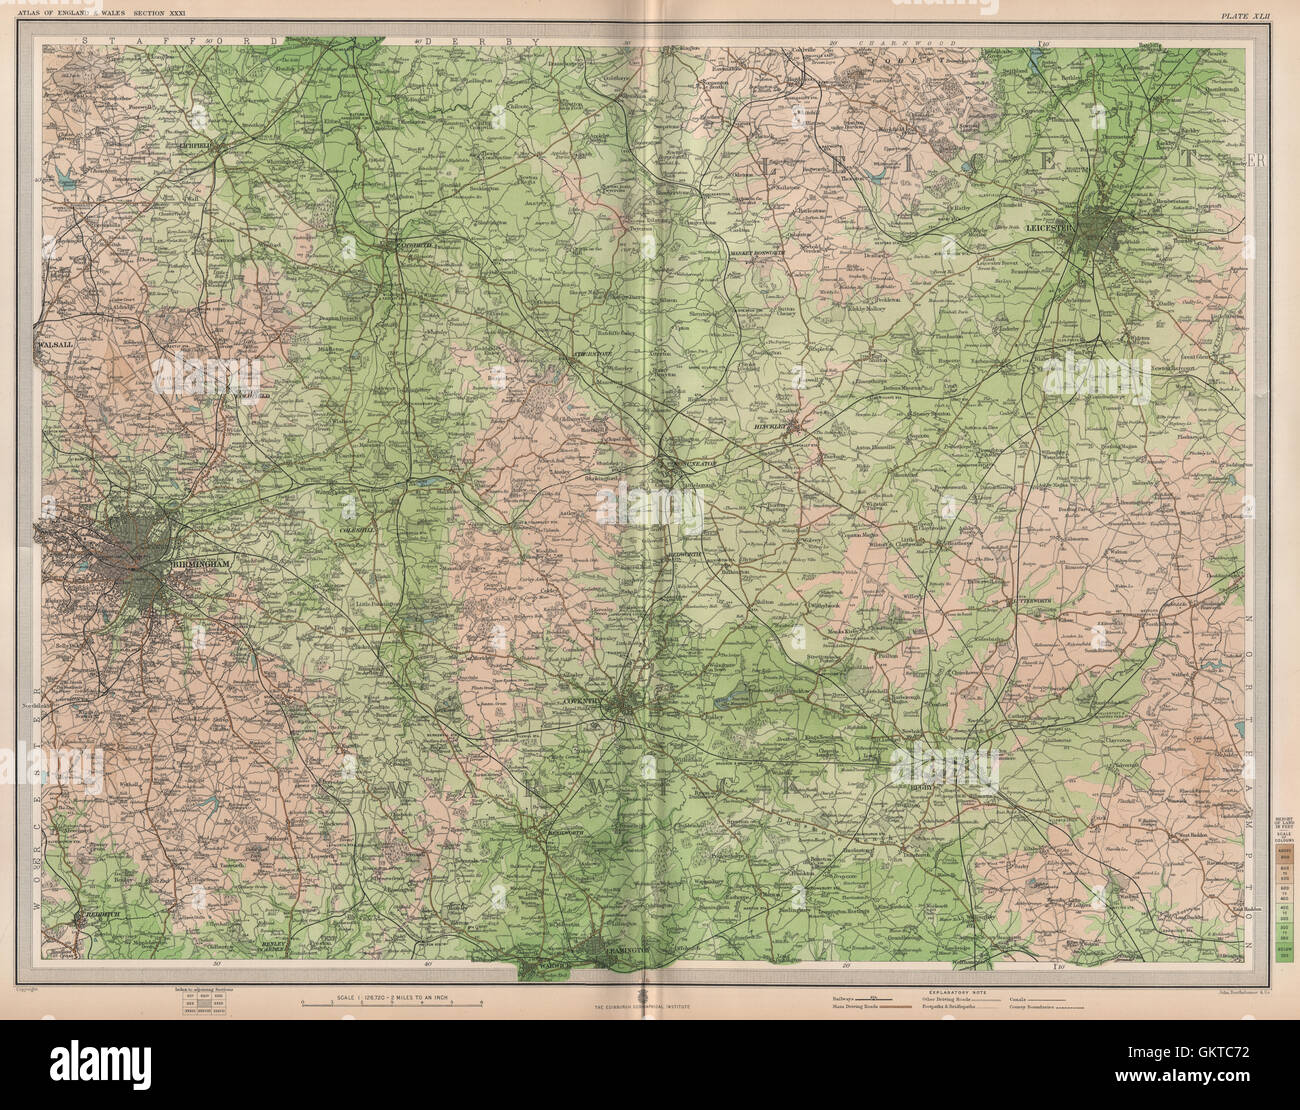 MIDLANDS. Birmingham Rugby Leicester Coventry Leamington Spa Redditch, 1903 map Stock Photo